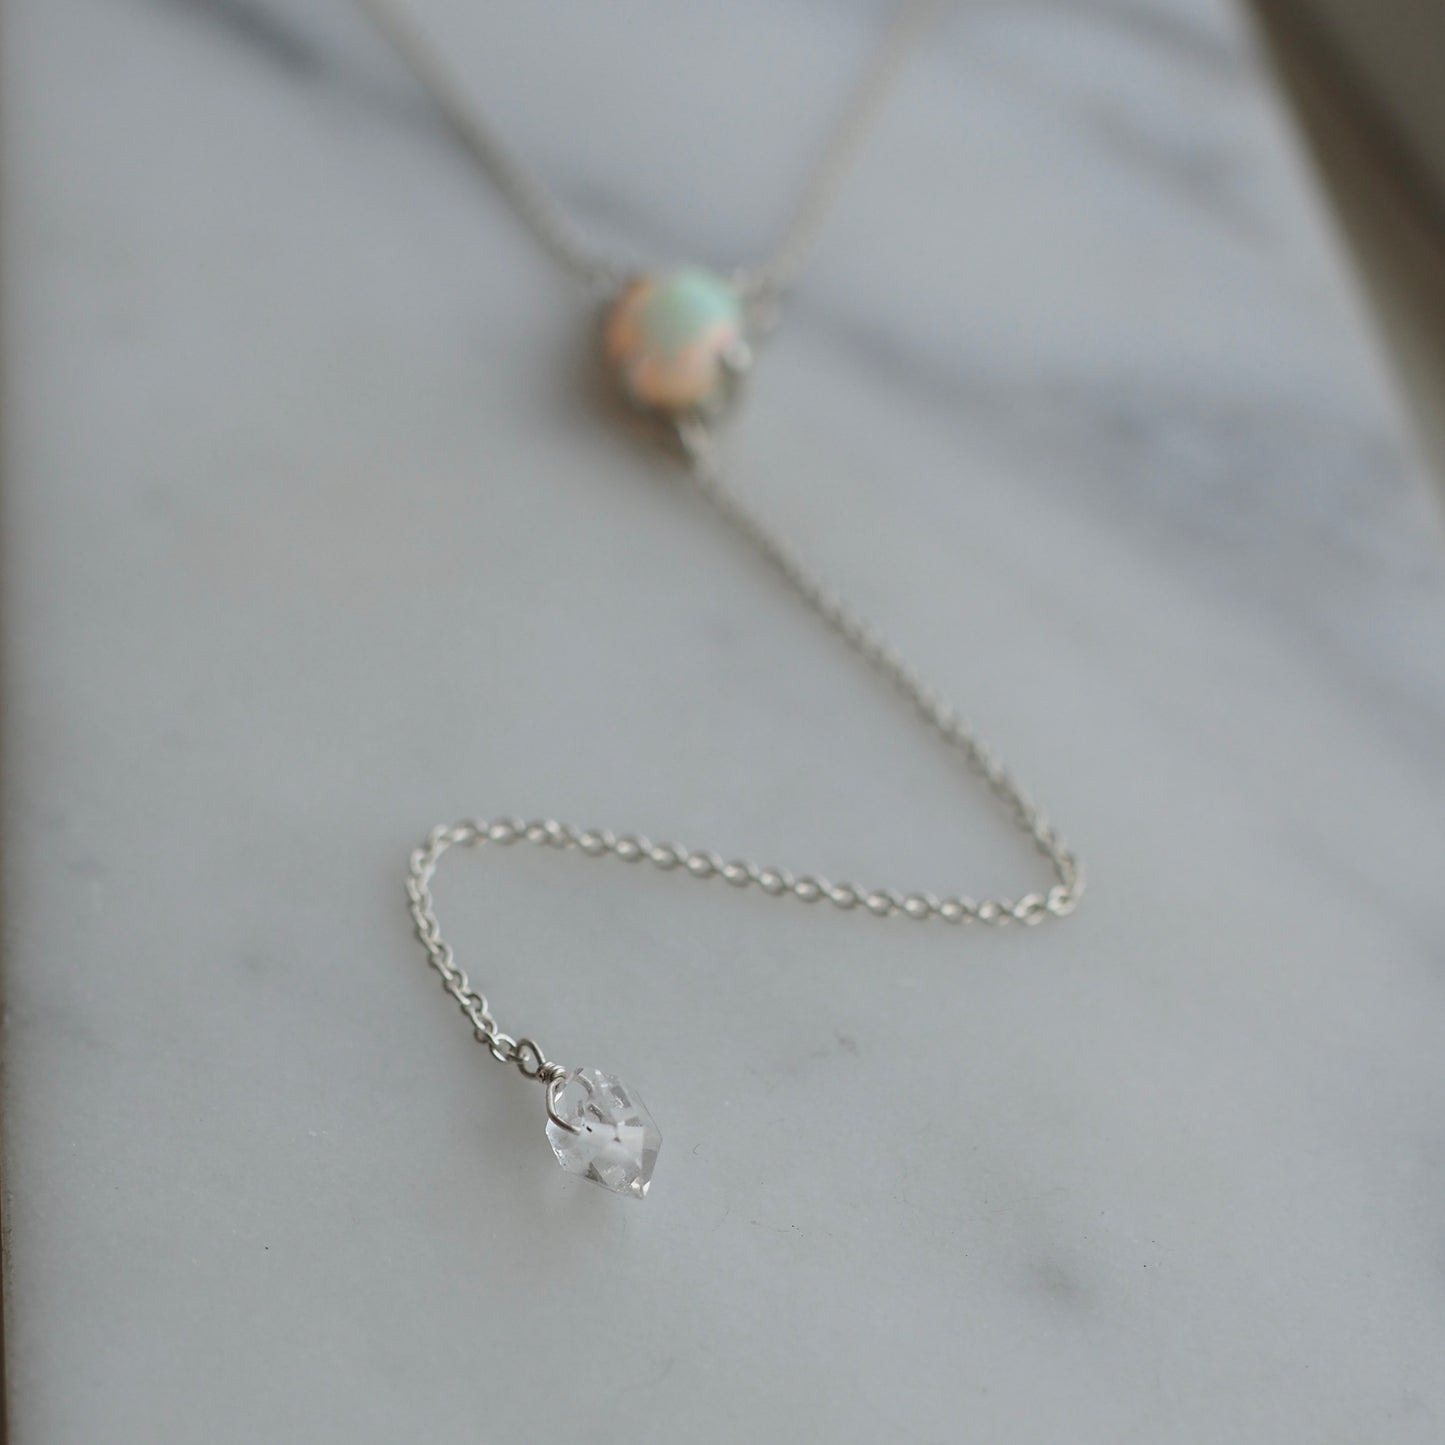 Silver Opal Lariat Necklace